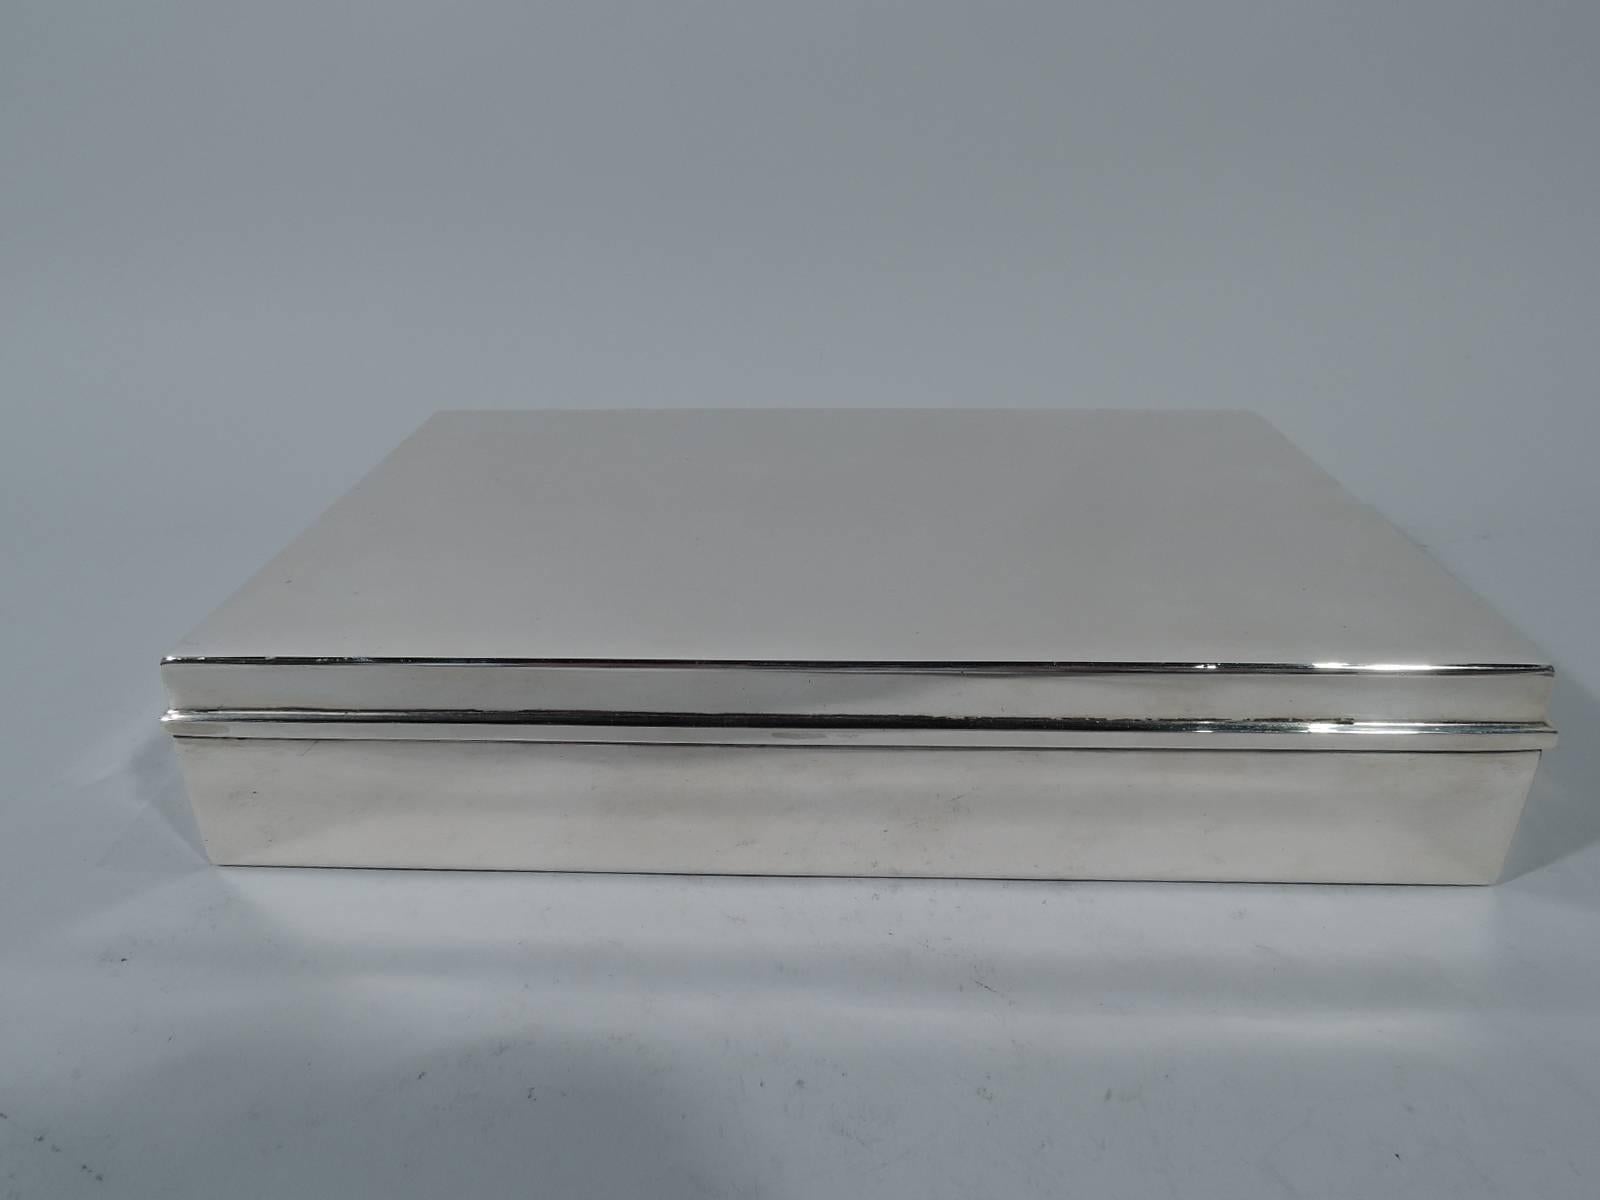 Large and classic sterling silver box. Made by Tiffany & Co. in New York. Rectangular with straight sides. Cover flat and hinged with molded rim. Box interior cedar lined and partitioned. Postwar hallmark includes pattern no. 22358. Gross weight: 32